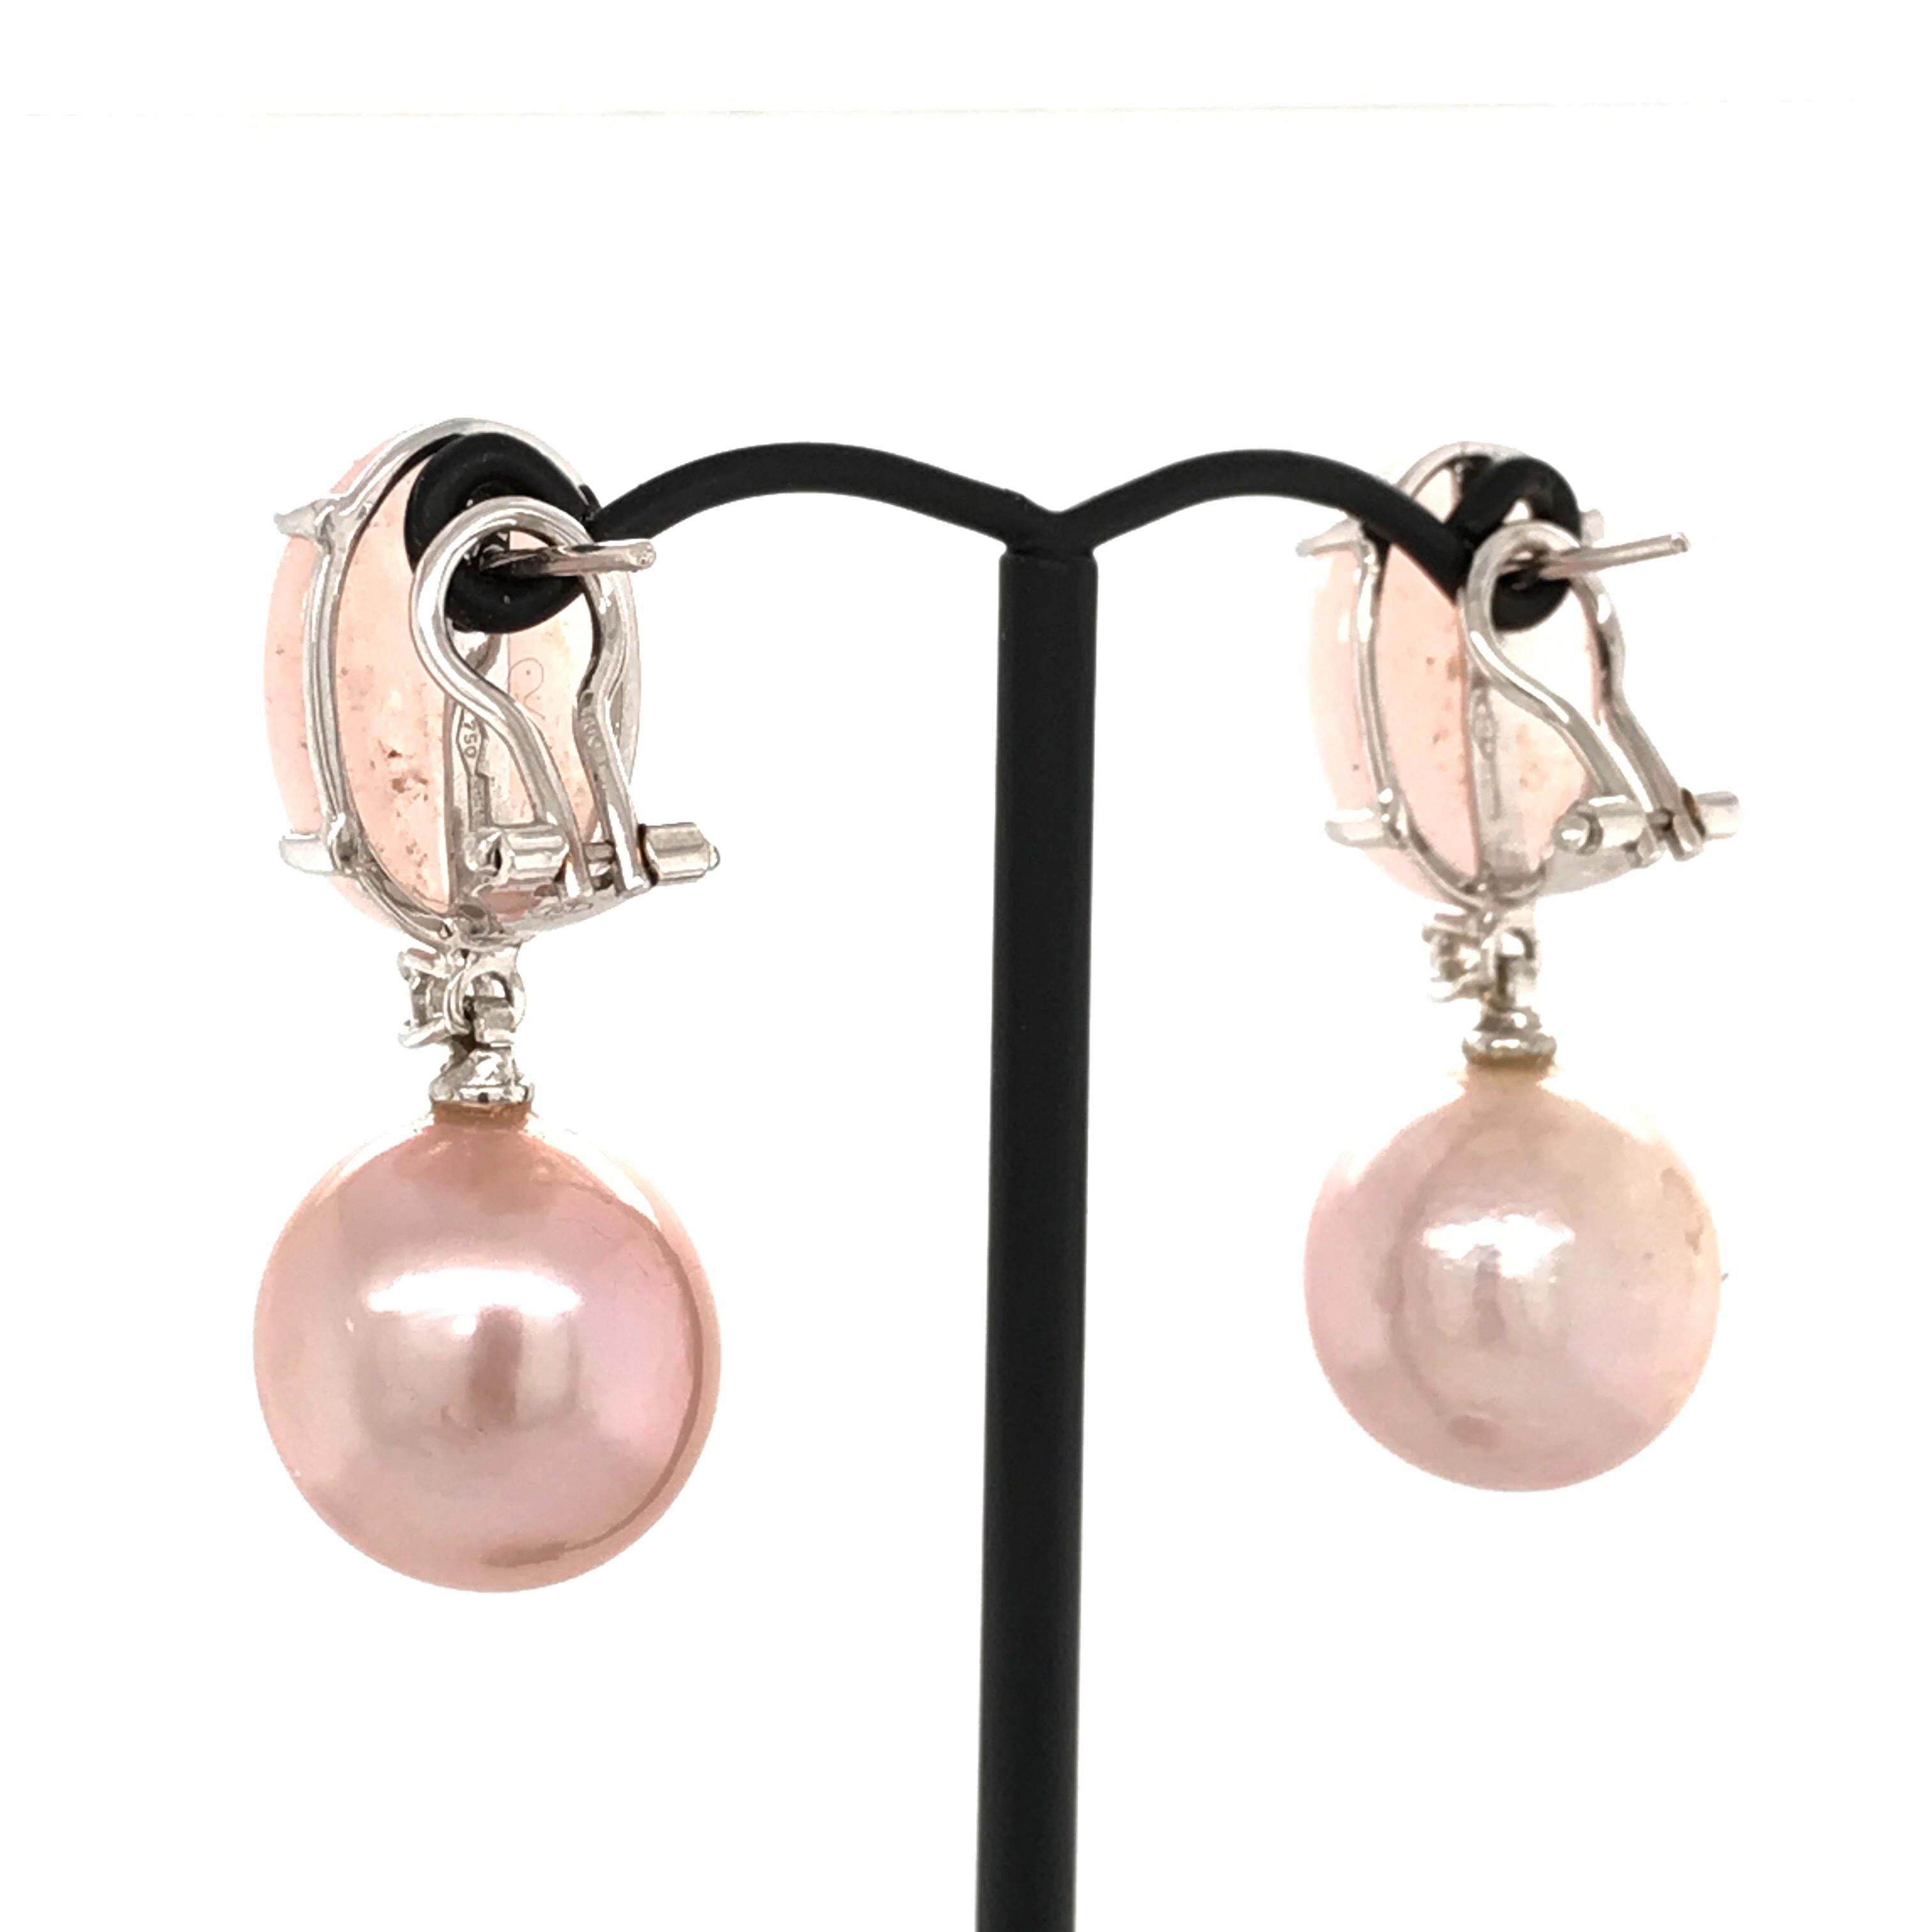 Cabochon Morganite with Cultured Perles and Diamonds on White Gold Chandelier Earrings